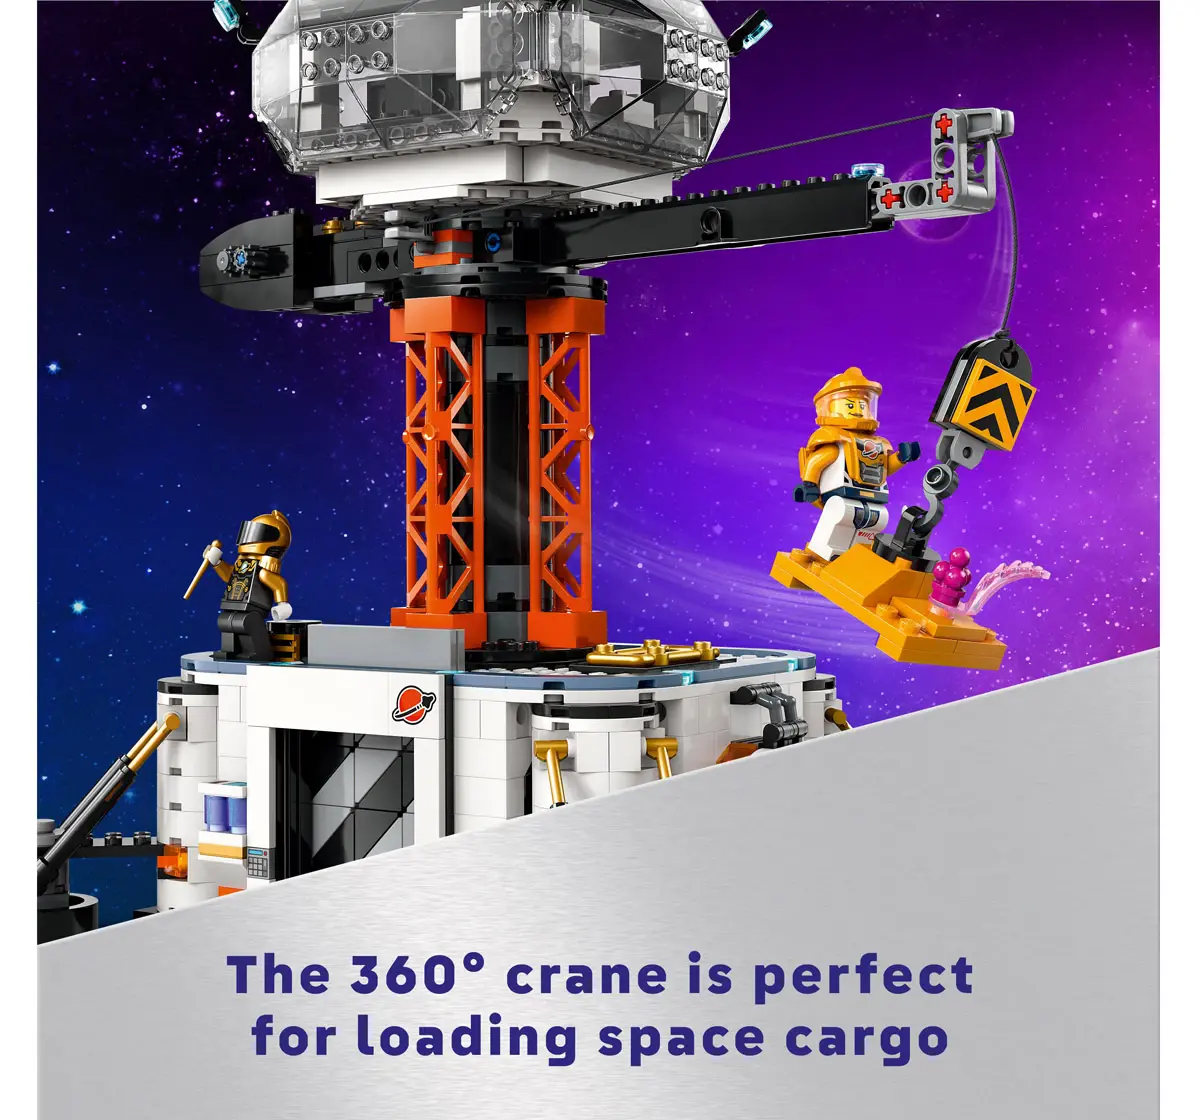 Lego City Space Base And Rocket Launchpad Set 60434 Multicolour For Kids Ages 8Y+ (1422 Pieces) 